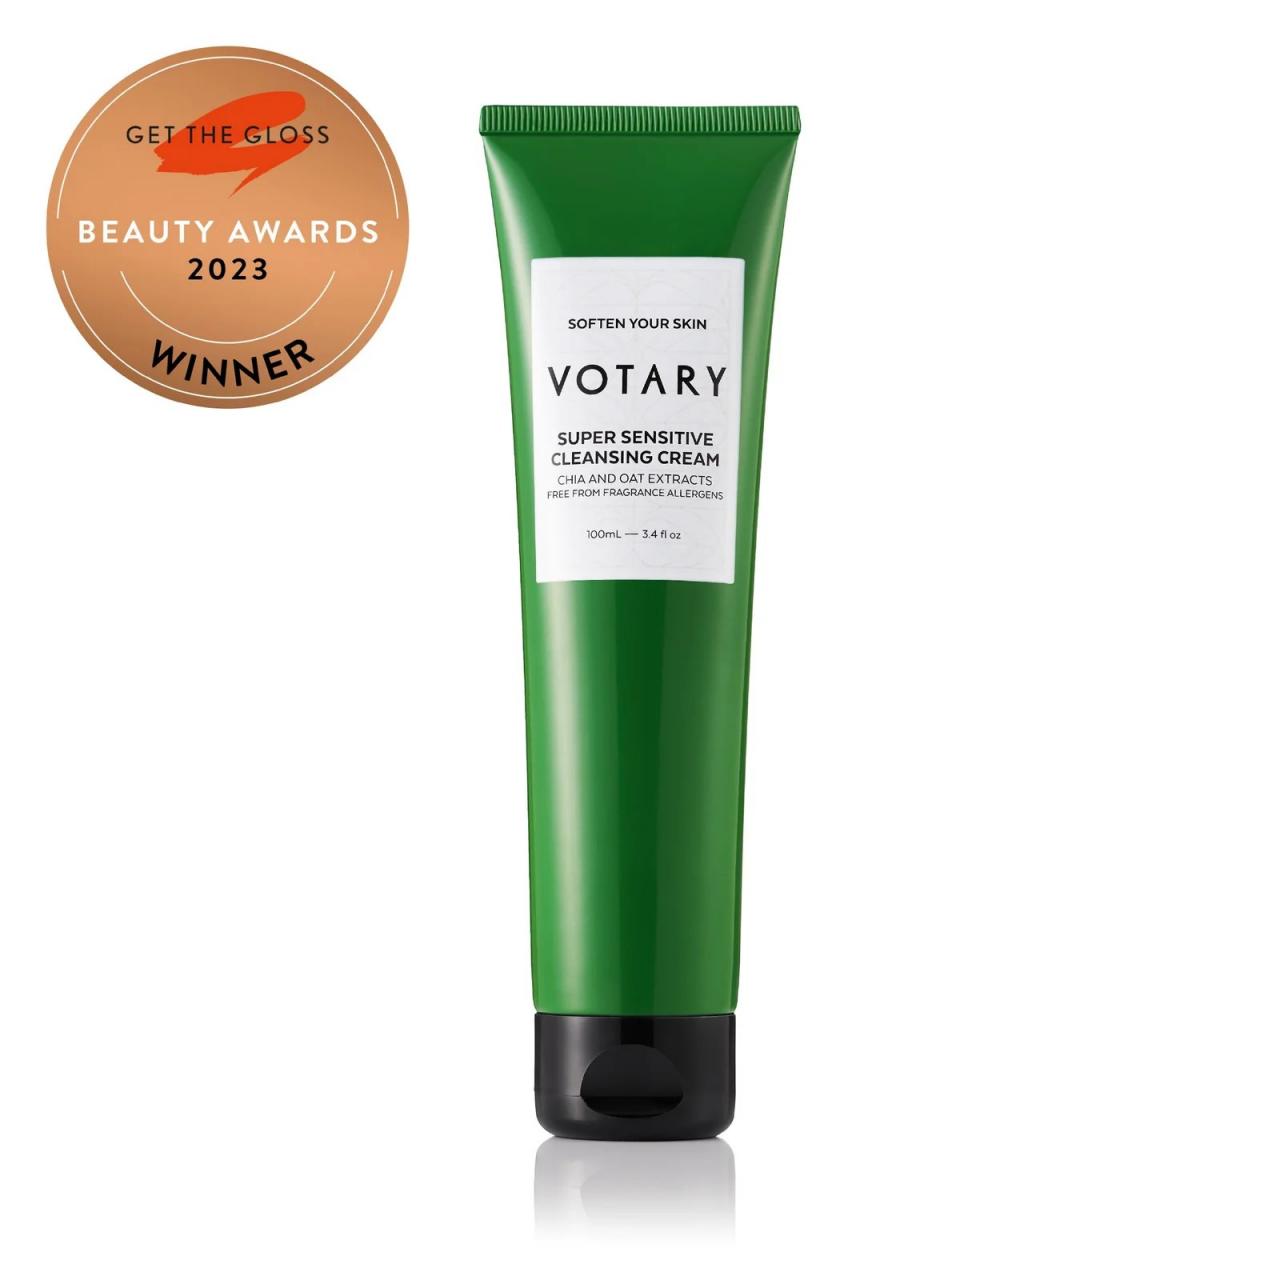 Votary Skincare, Ethical, Sustainable, and Innovative Skincare Solutions